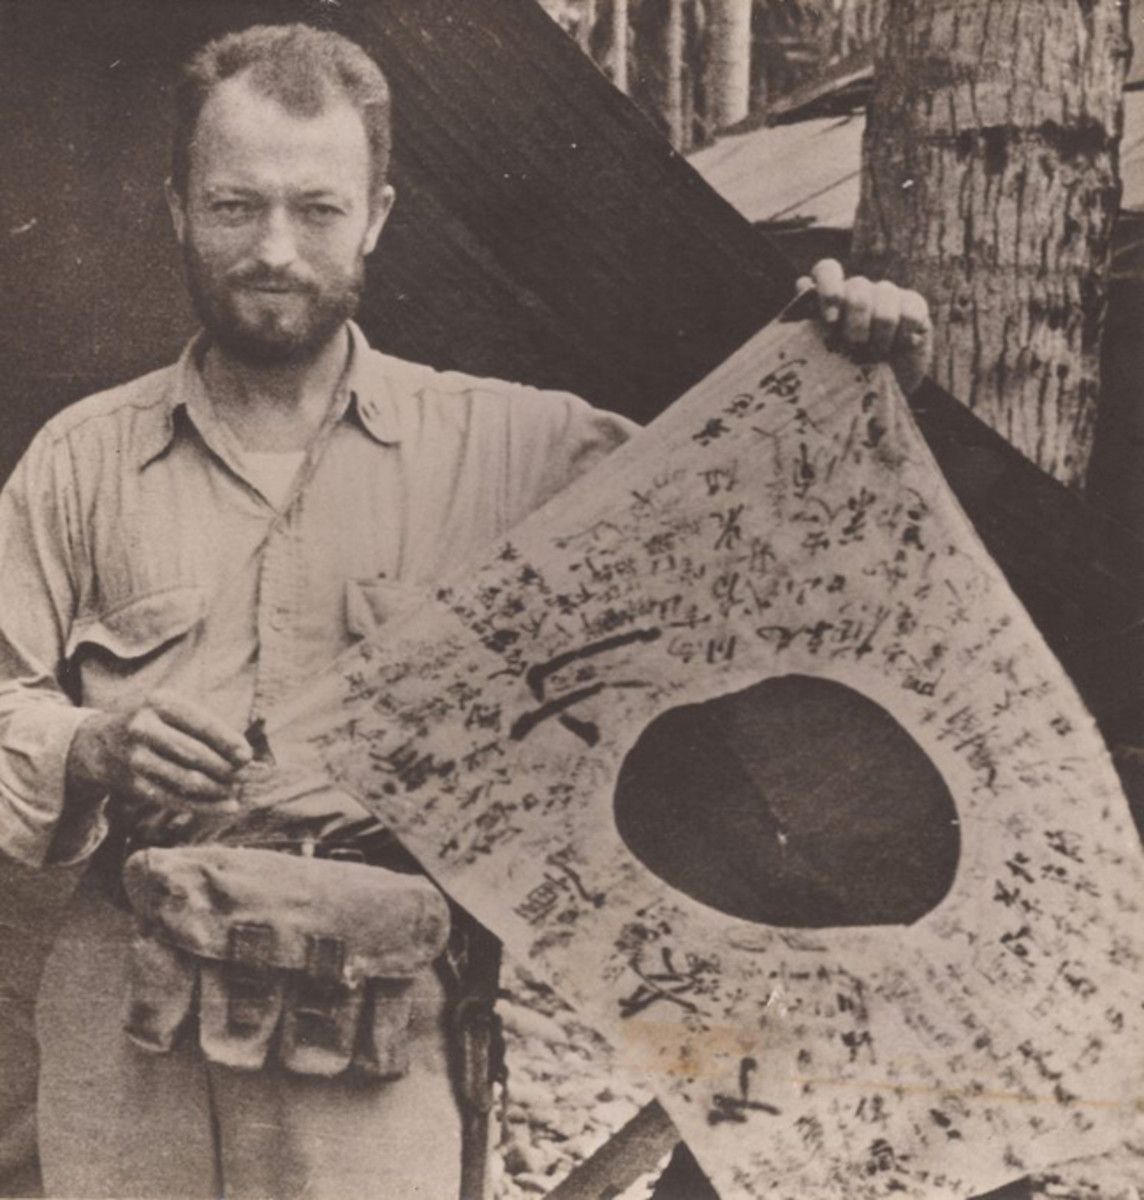  Following his rescue, Hugh Miller displays the hinomaru yosegaki flag he took from the body of one of the first enemy troops he killed on Arundel Island. Carried by the majority of Japanese military personnel in World War II, these flags were symbols of good luck given to men before they deployed. Inscribed with patriotic slogans, religious sayings and good wishes for health and success in battle, the flags were often worn wrapped around the body. (National Archives. Courtesy of Mr. Stephen Harding)